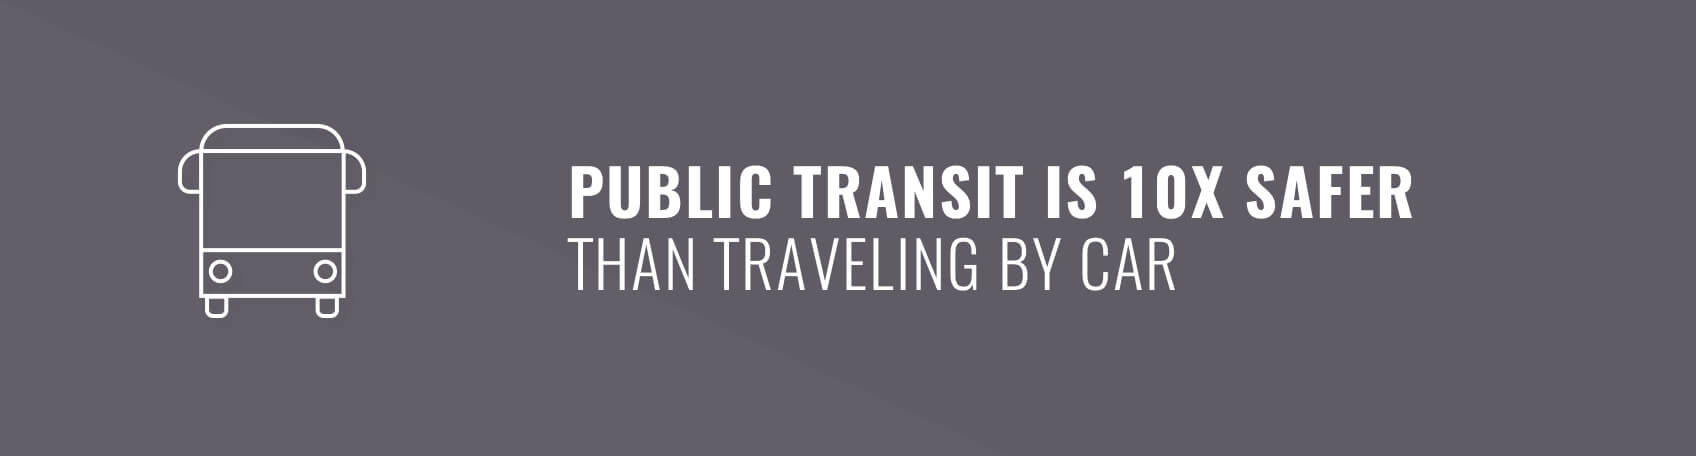 Public transit is 10X safer than traveling by car